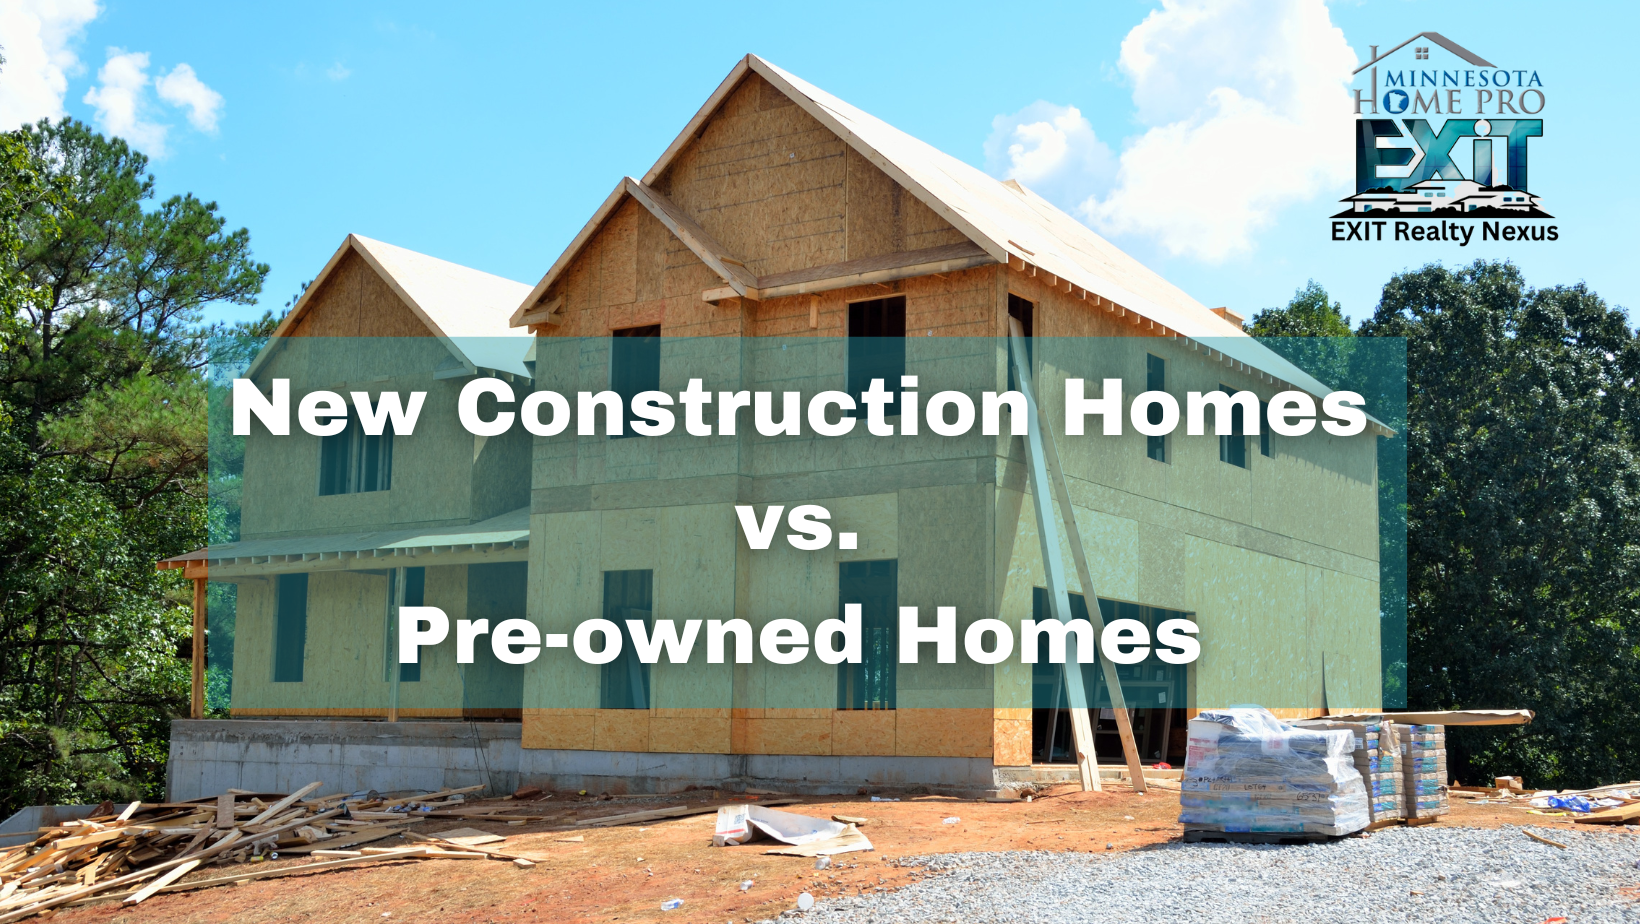 5 Advantages of a Buying a New Construction Home